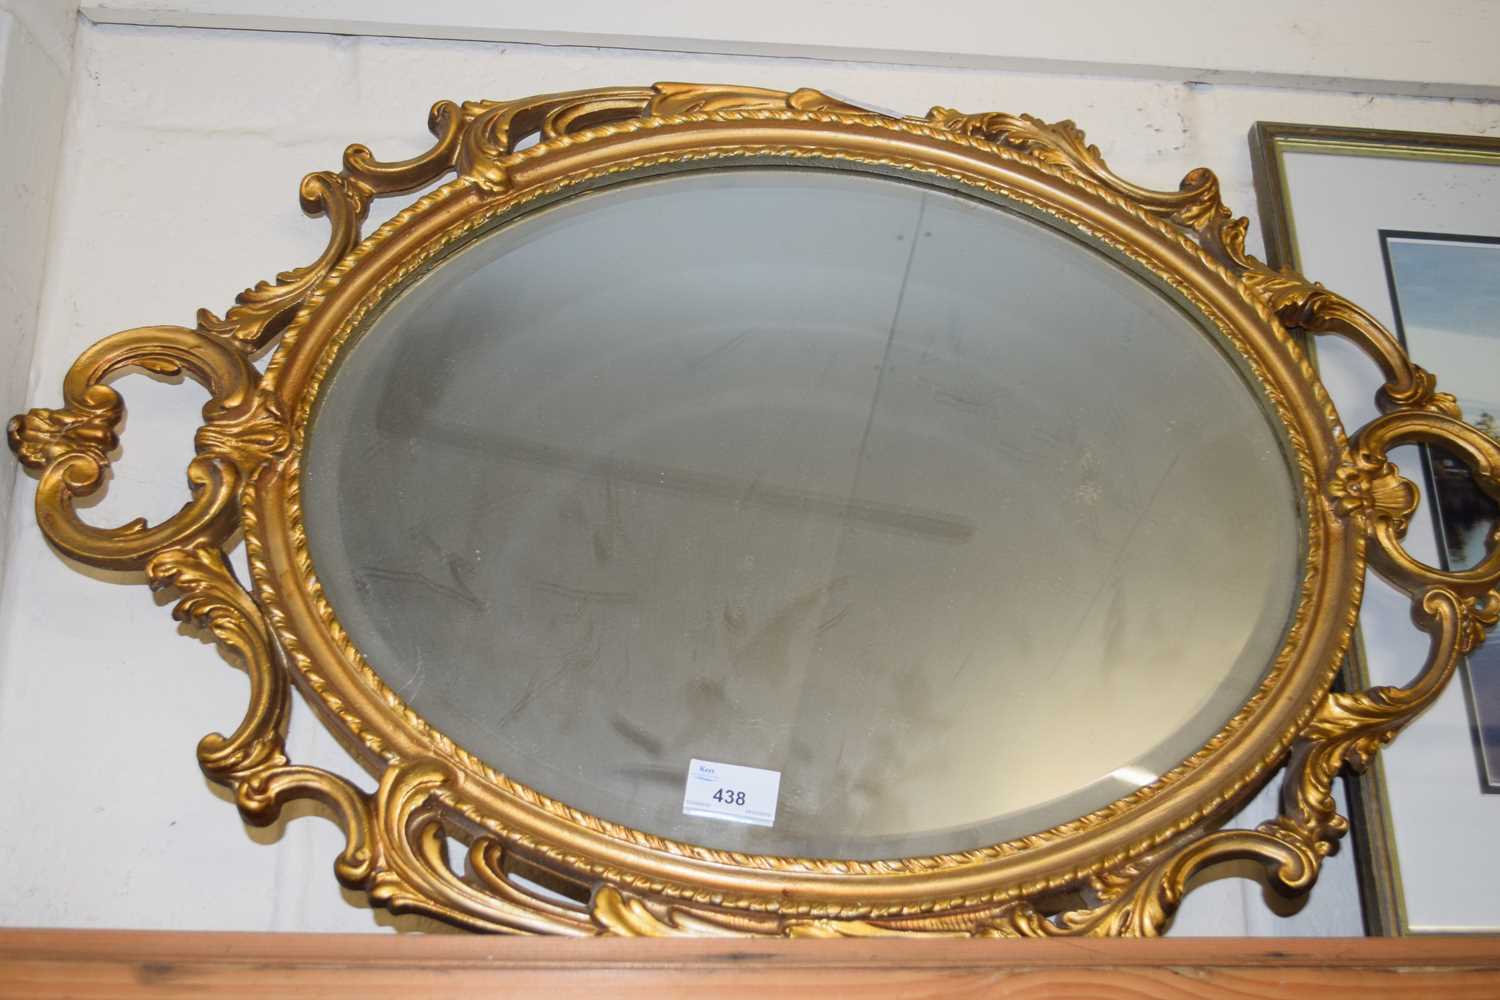 OVAL BEVELLED WALL MIRROR IN A GILT FINISH METAL FRAME - Image 2 of 2